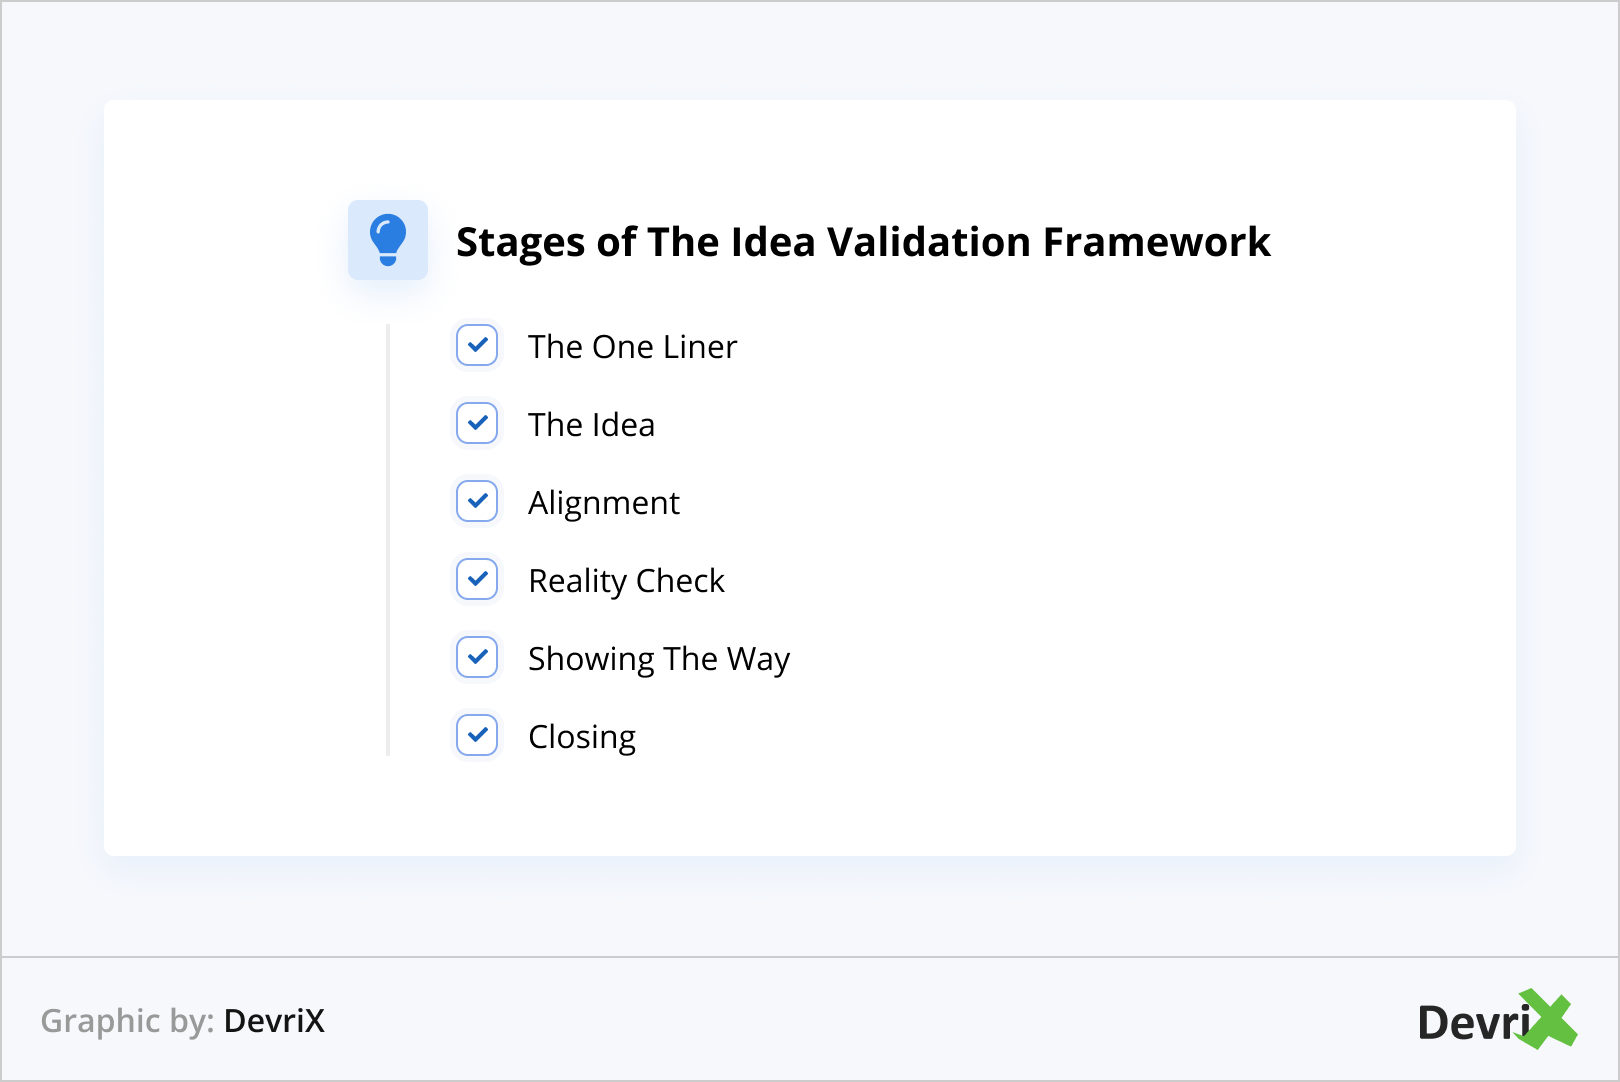 Stages of The Idea Validation Framework